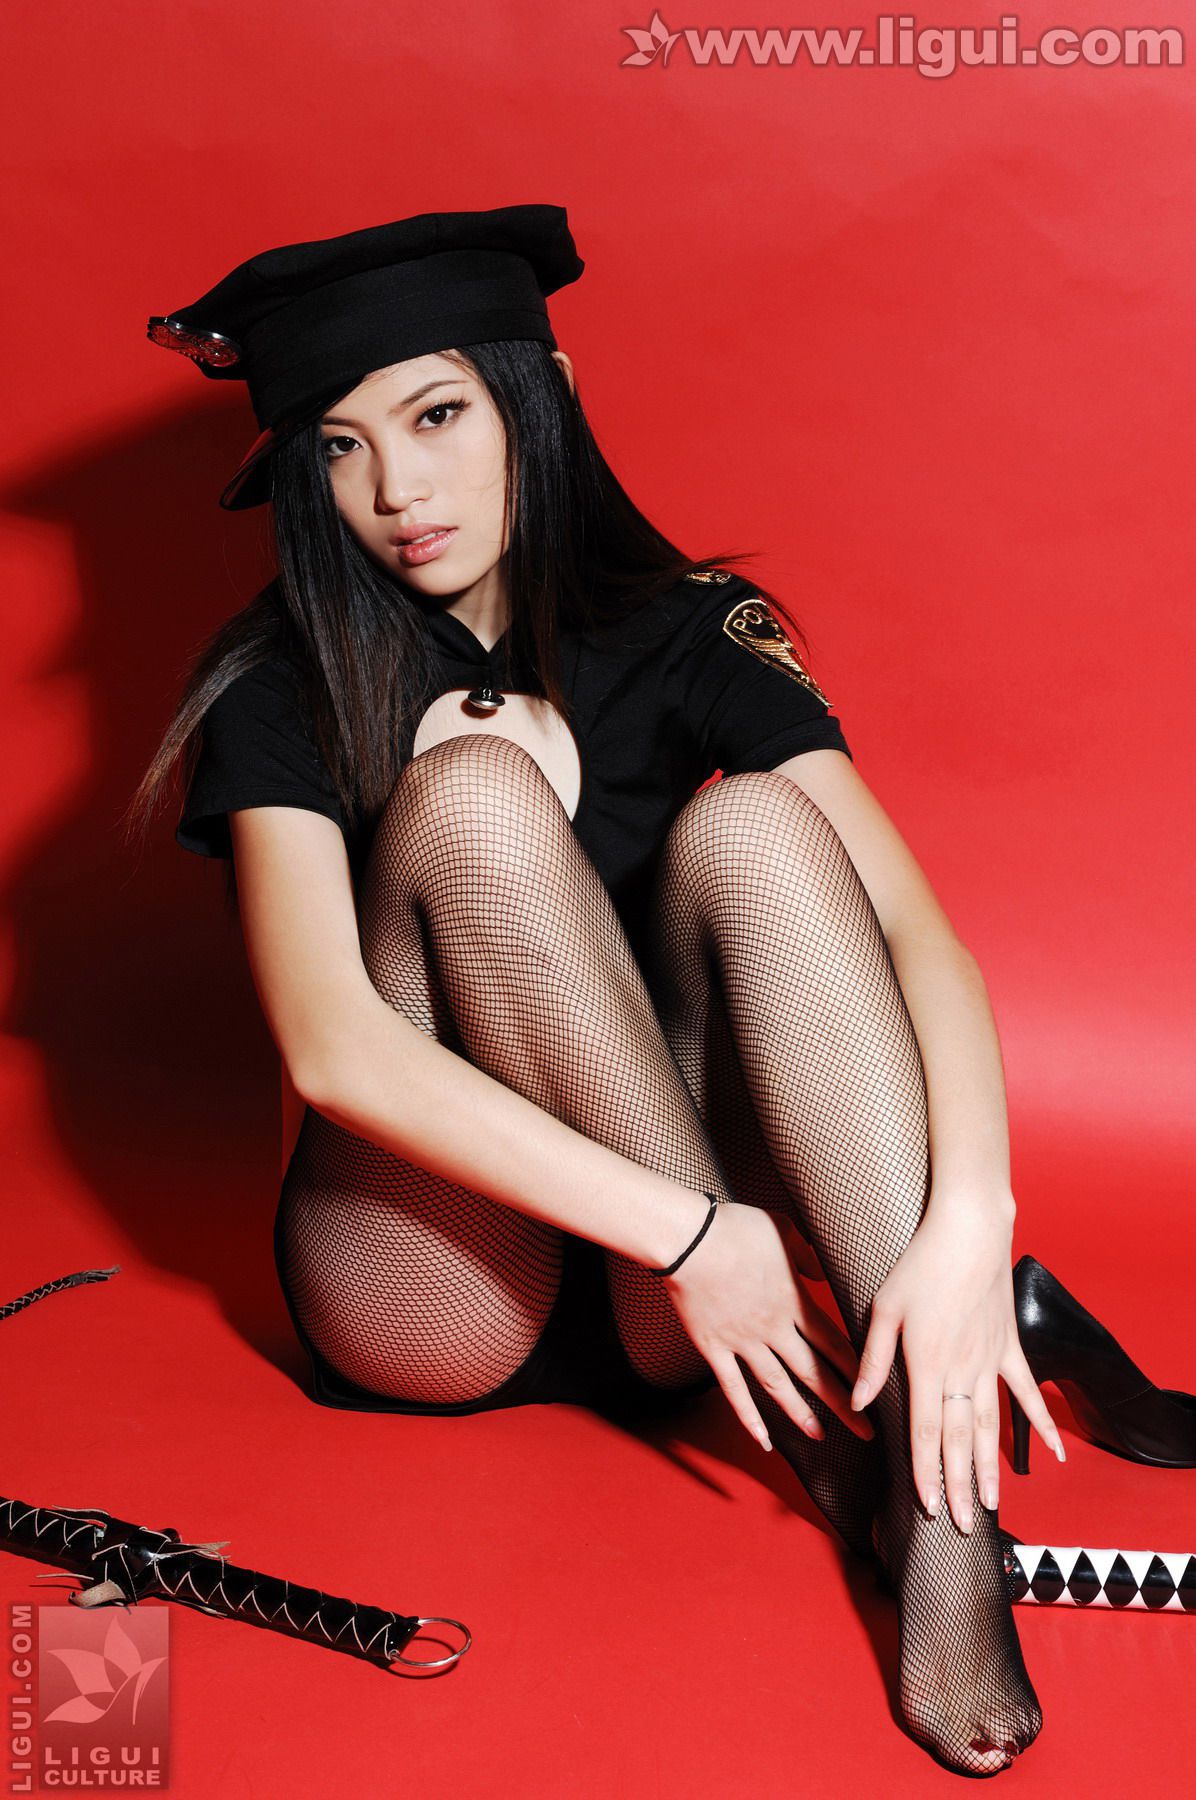 Model Zuo Zuo “Sexy Girl Style with Red Background” [丽柜美拍LiGui] Photo pictures of beautiful legs and jade feet